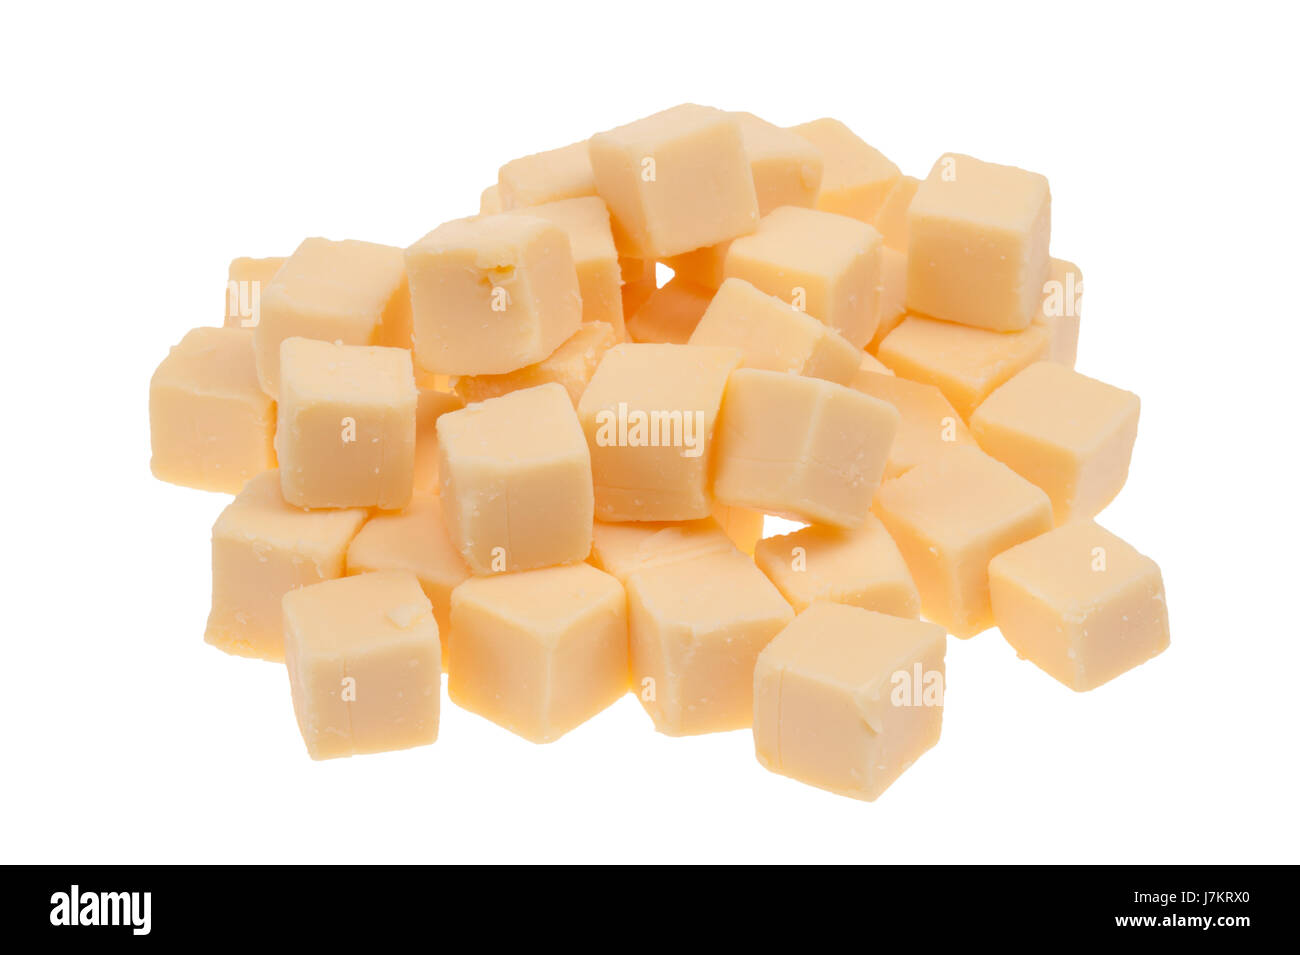 food aliment isolated cheese blocks dutch block snack white food aliment object Stock Photo